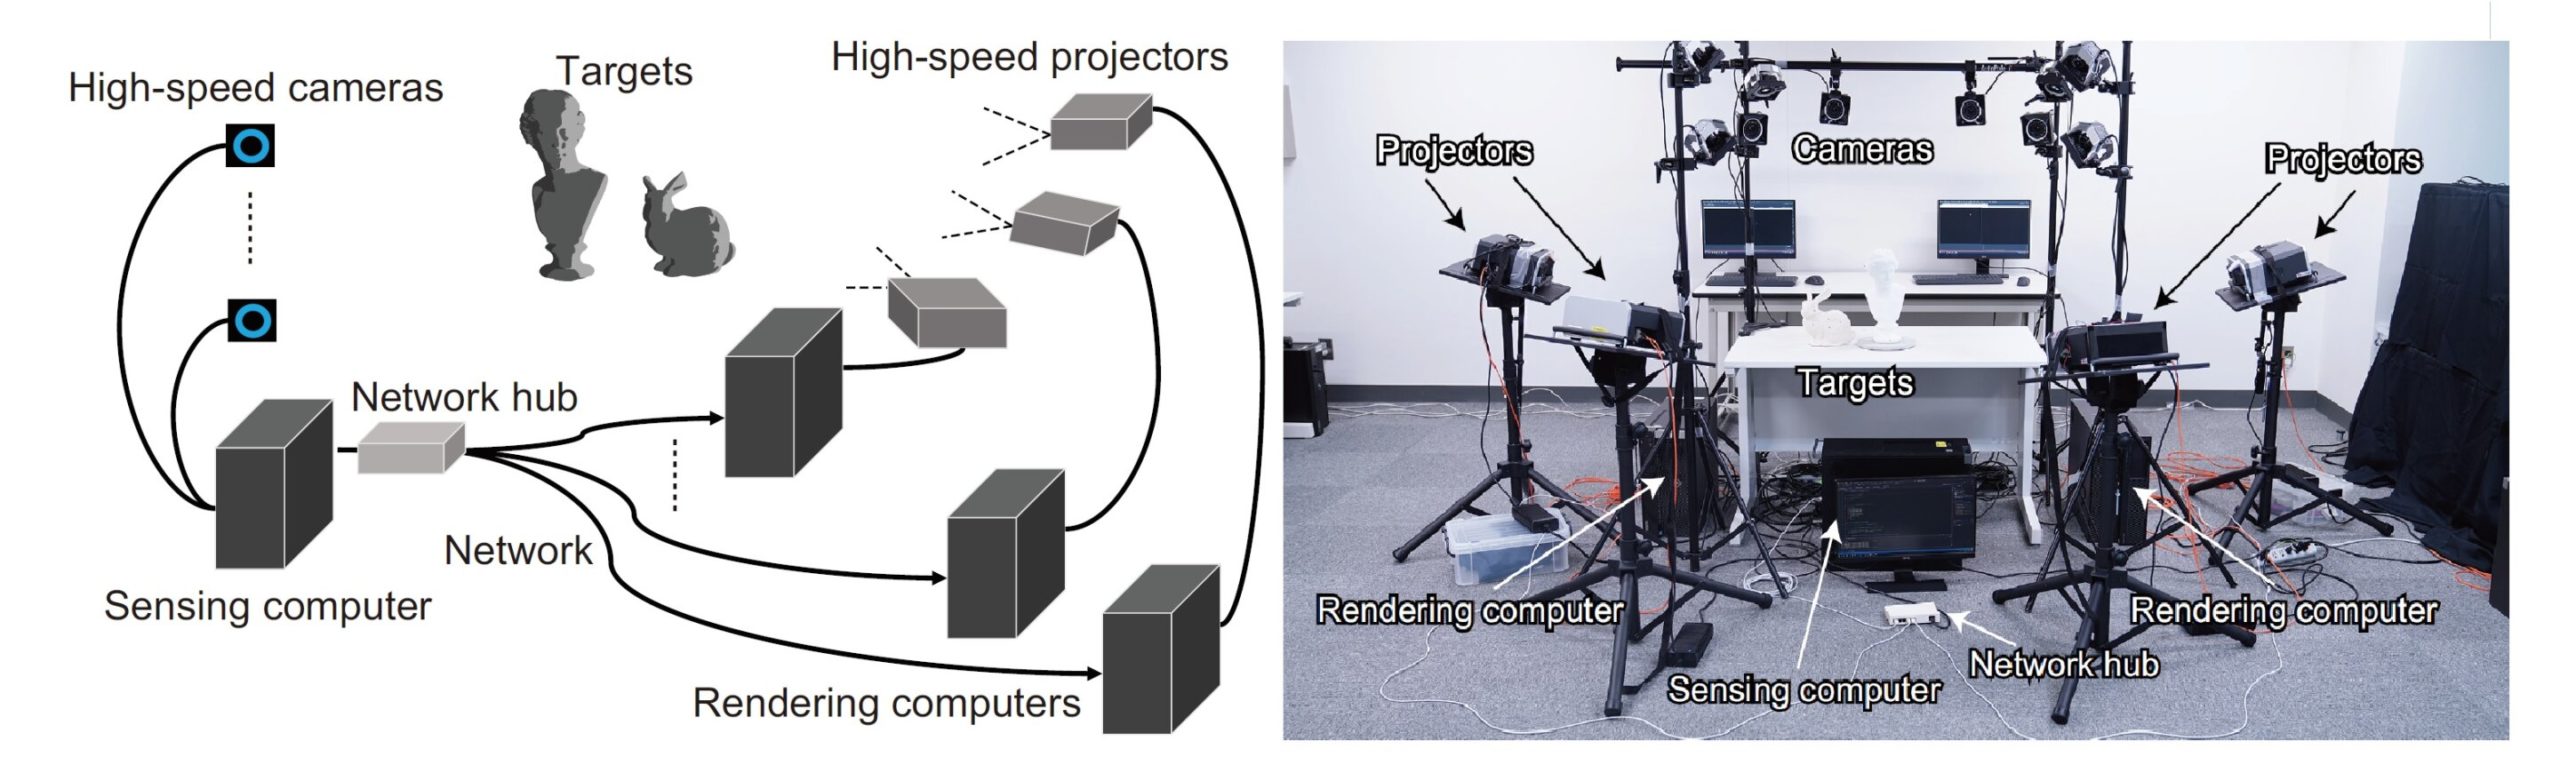 Intensity control of projectors in parallel: A doorway to an augmented reality future